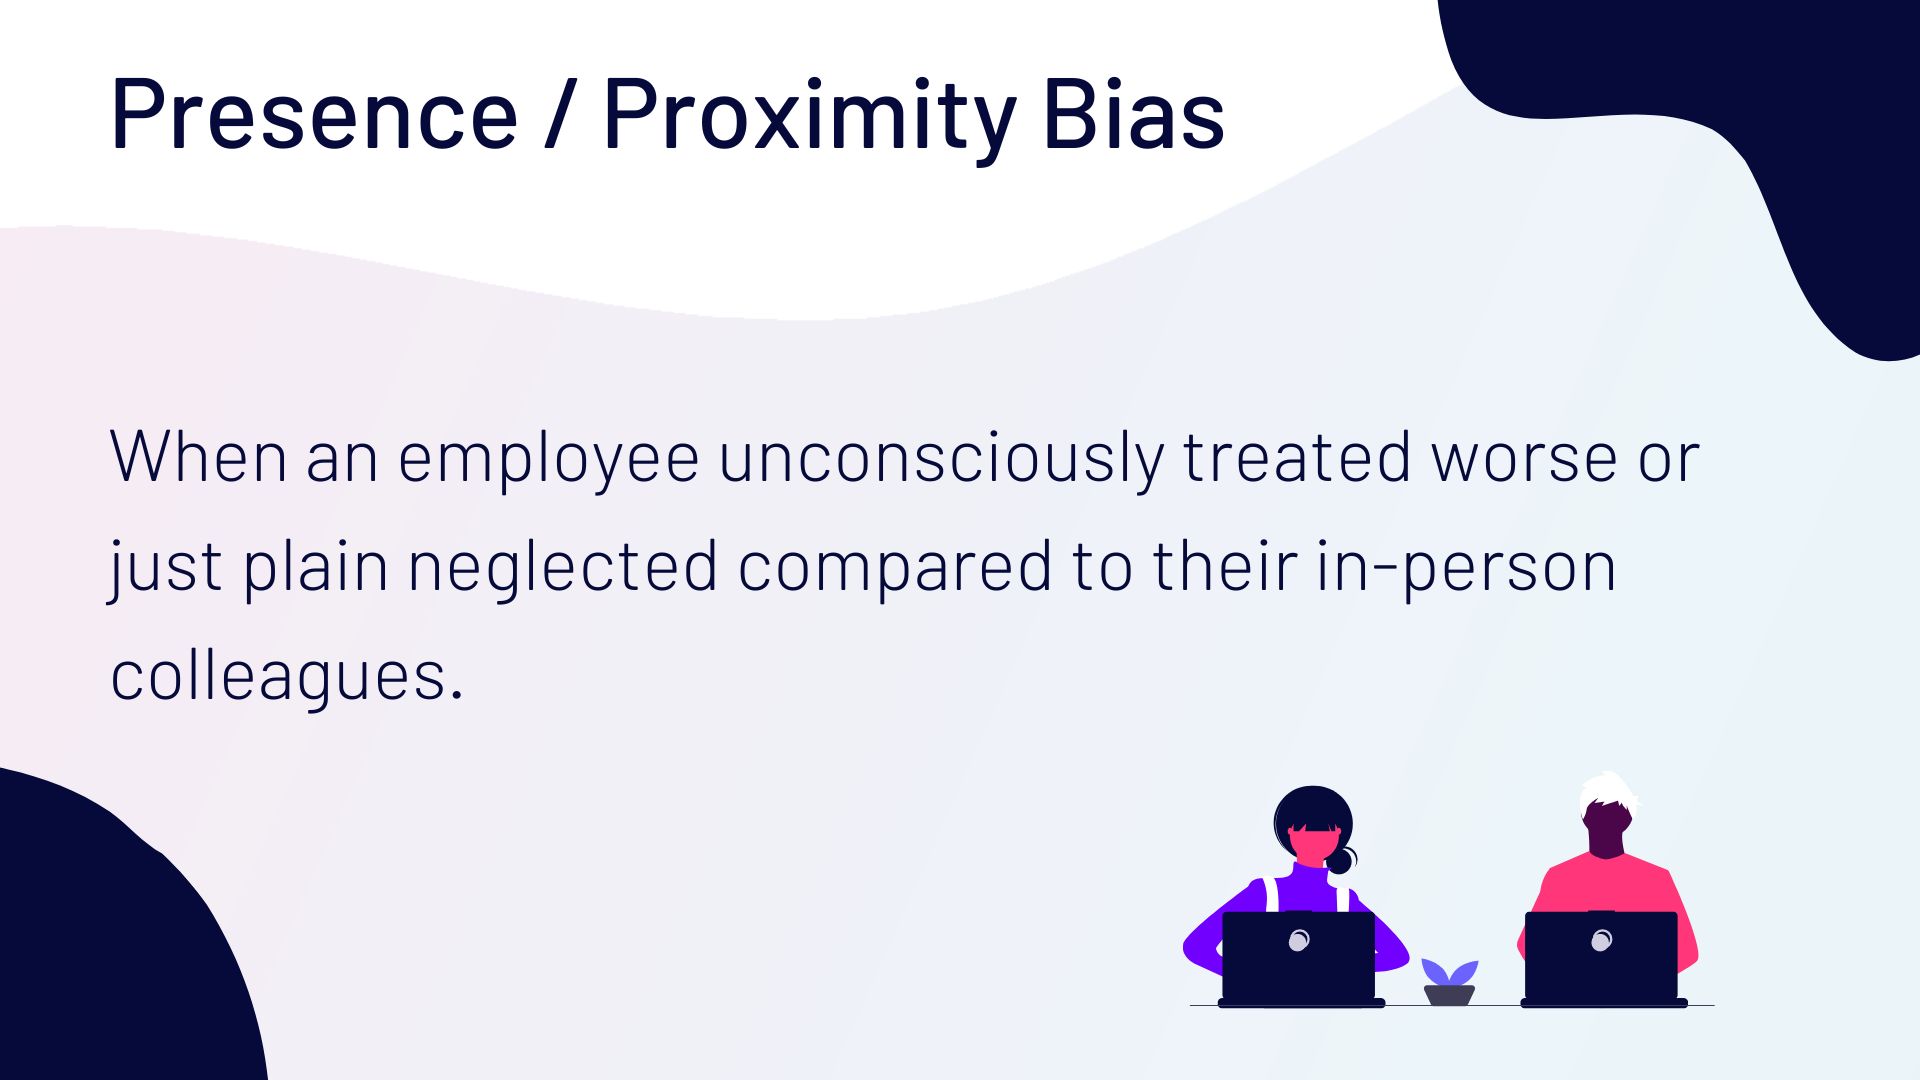 What is the proximity bias?